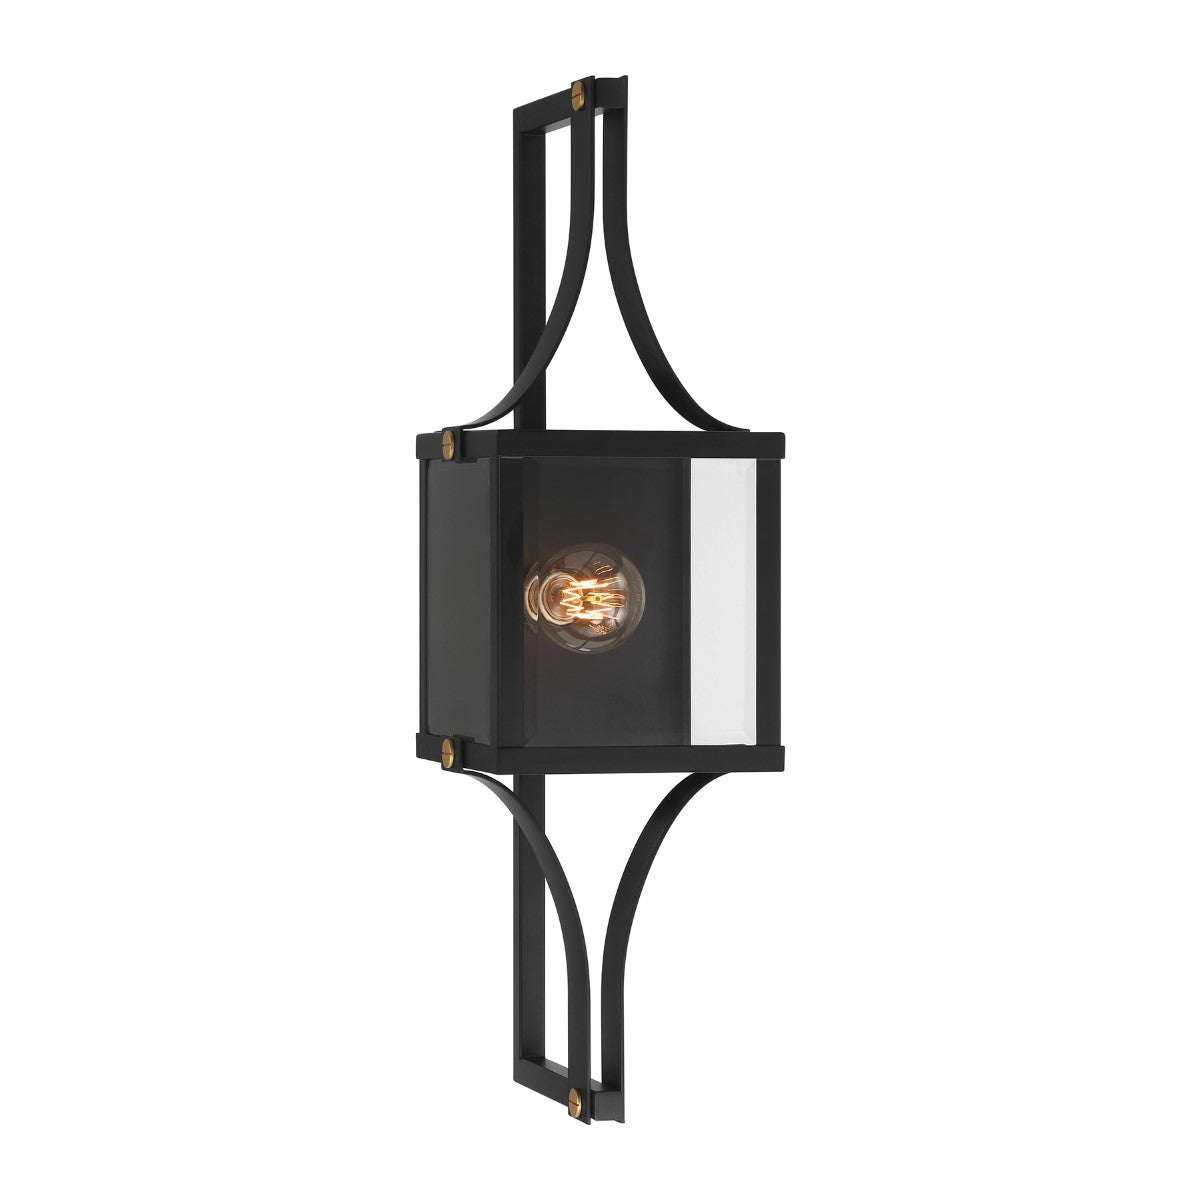 Raeburn 28 in. Outdoor Wall Lantern Matte Black and Weathered Brushed Brass Finish - Bees Lighting